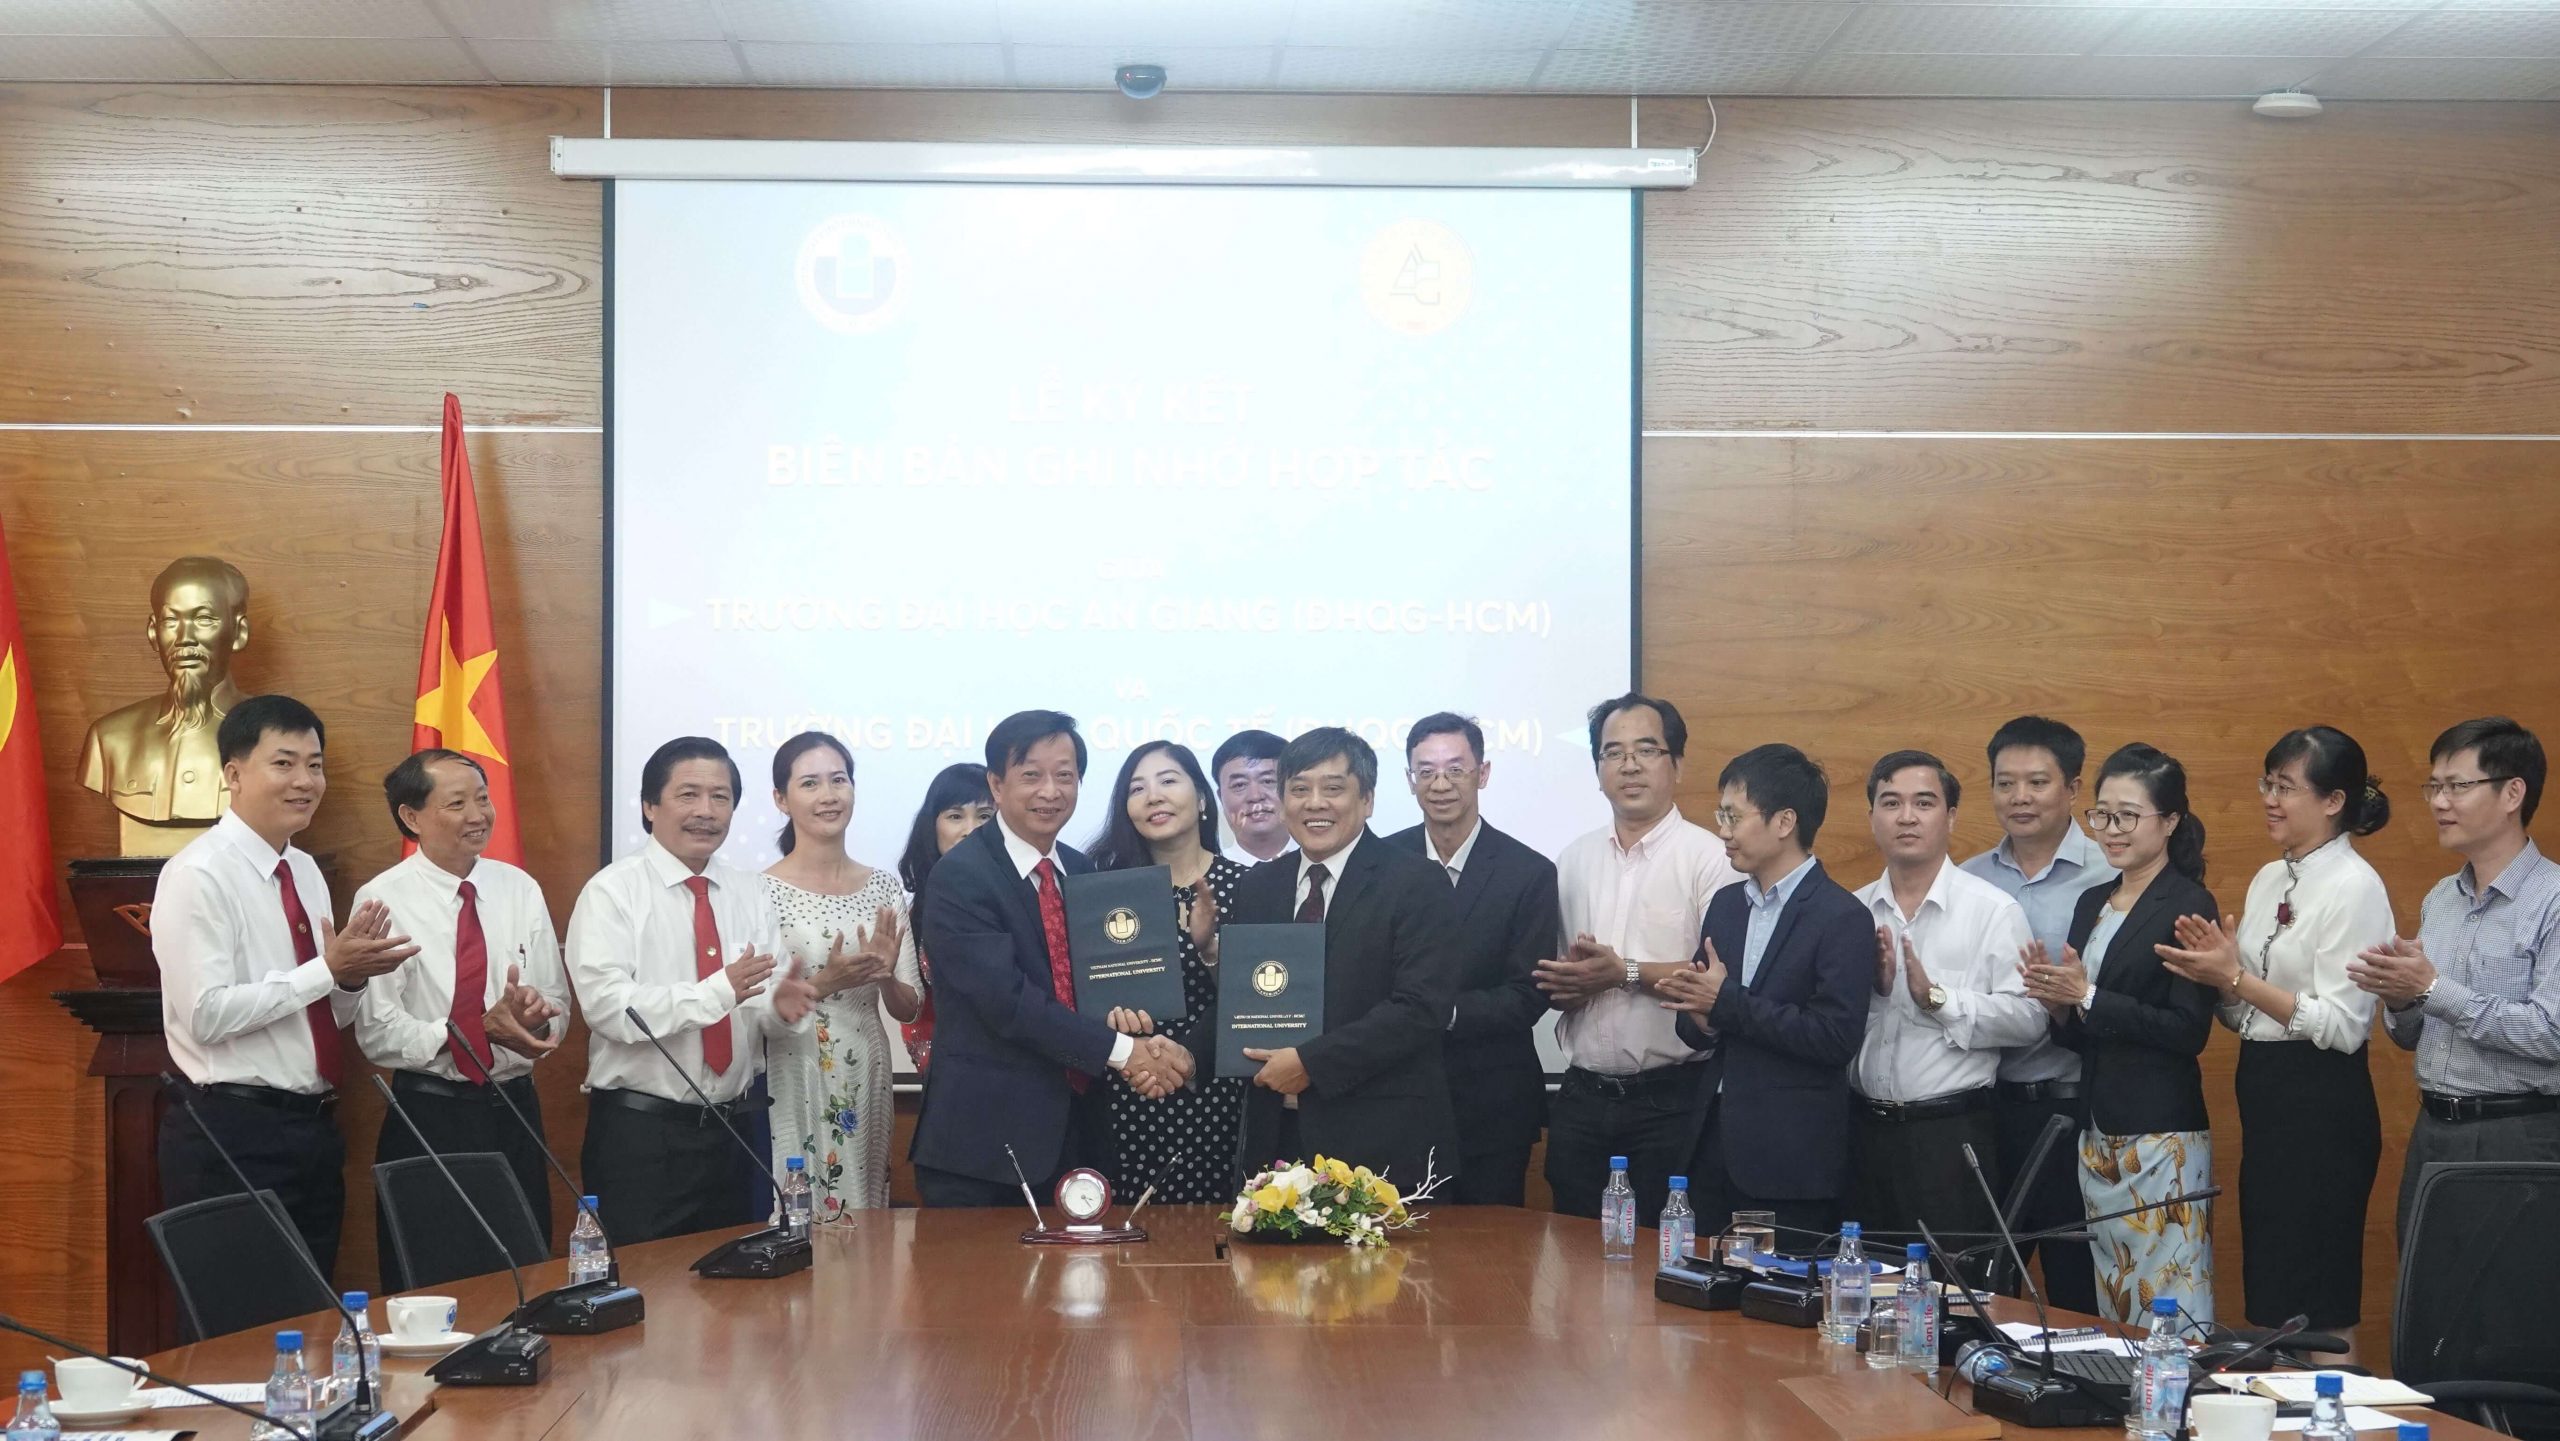 INTERNATIONAL UNIVERSITY SIGNED A COOPERATION AGREEMENT WITH AN GIANG UNIVERSITY